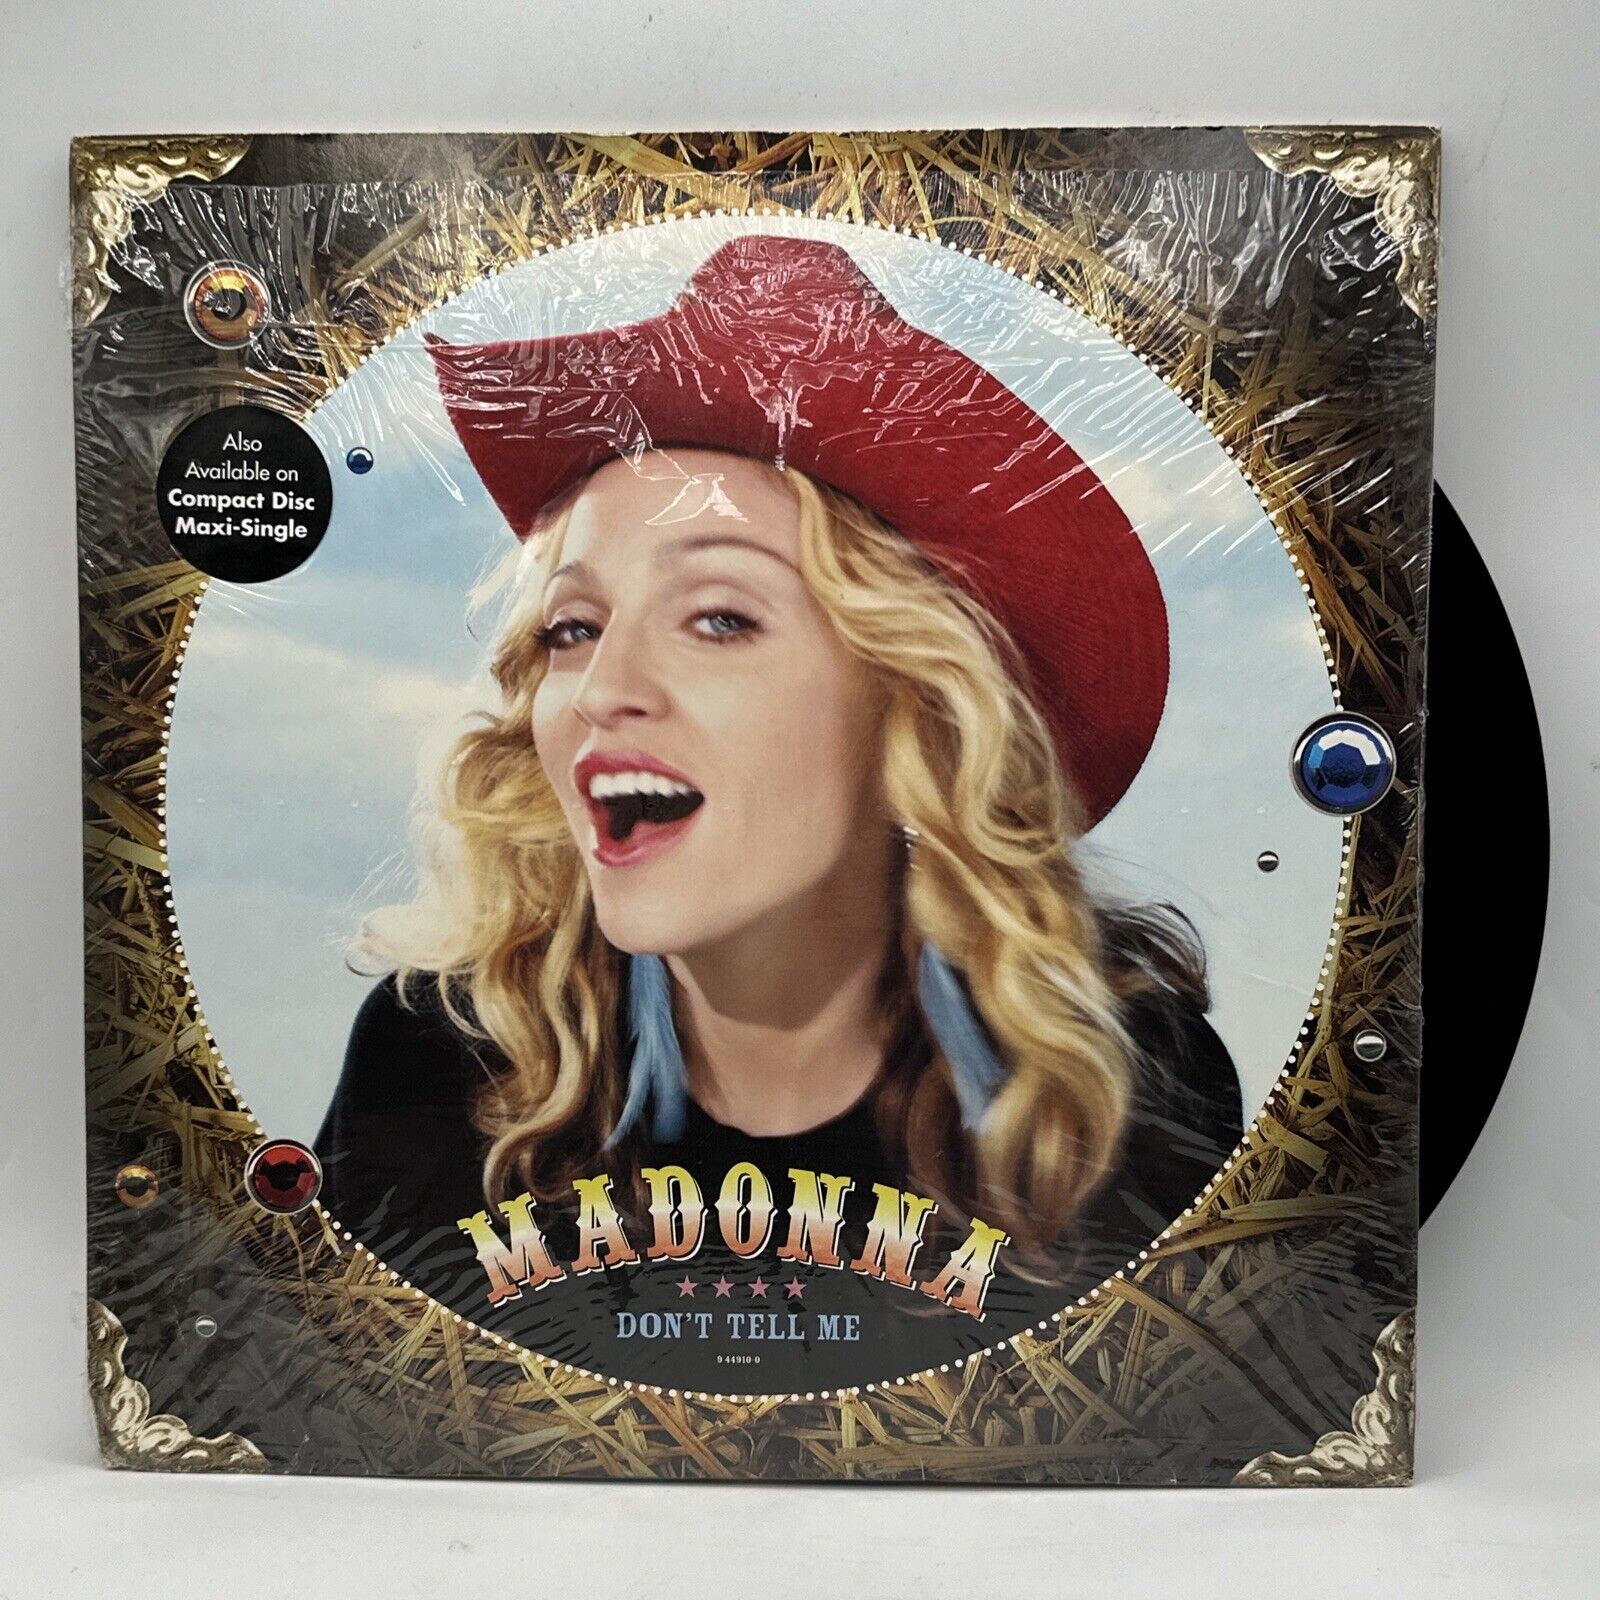 Madonna - Don’t Tell Me - 2000 US 12” Single (NM) in Shrink Ultrasonic Clean